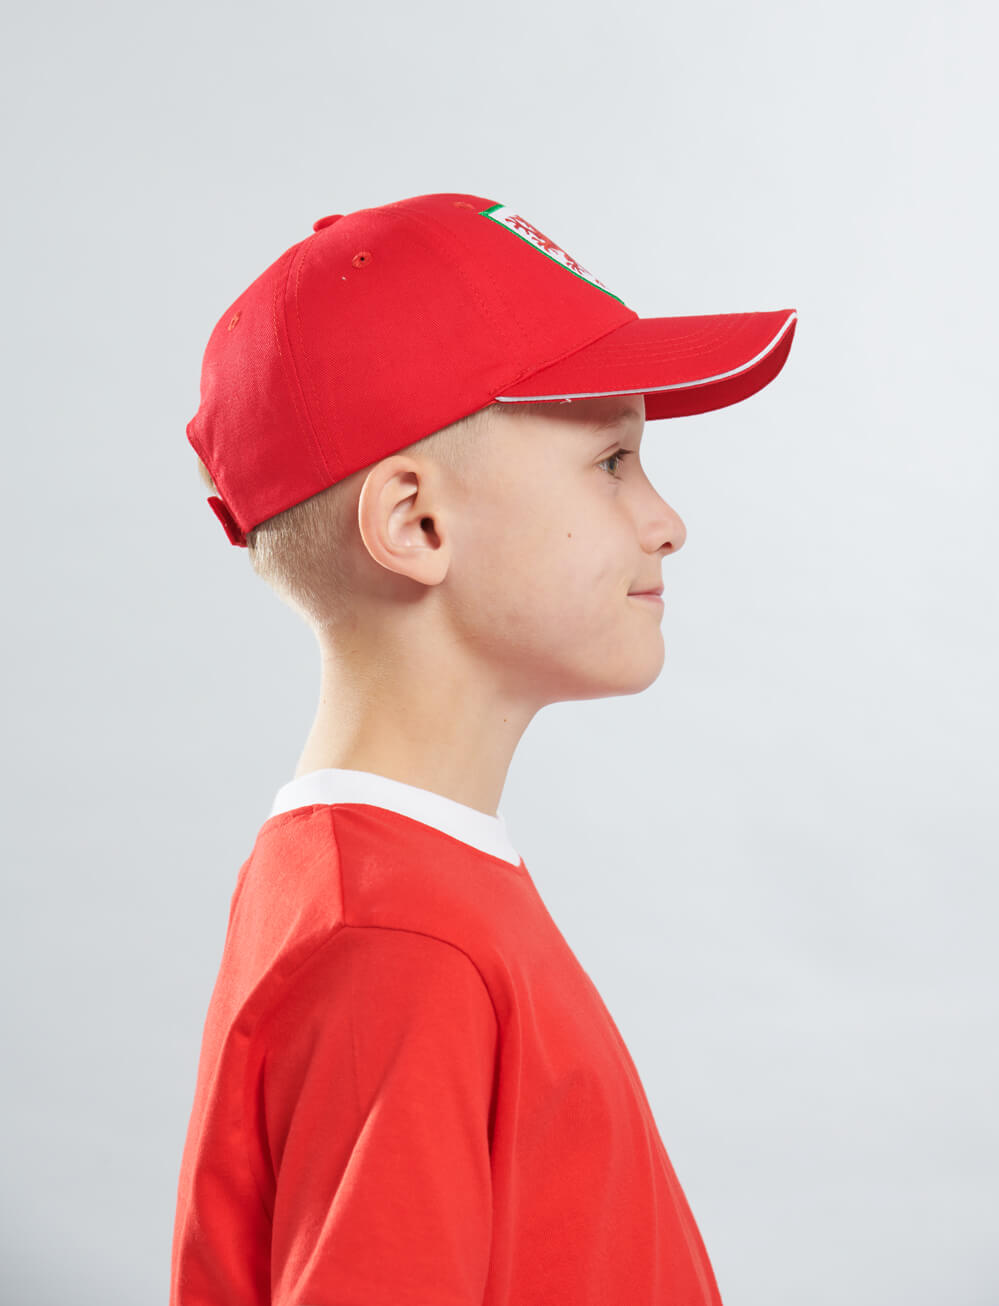 Official Team Wales Kids Cap - Red - The World Football Store